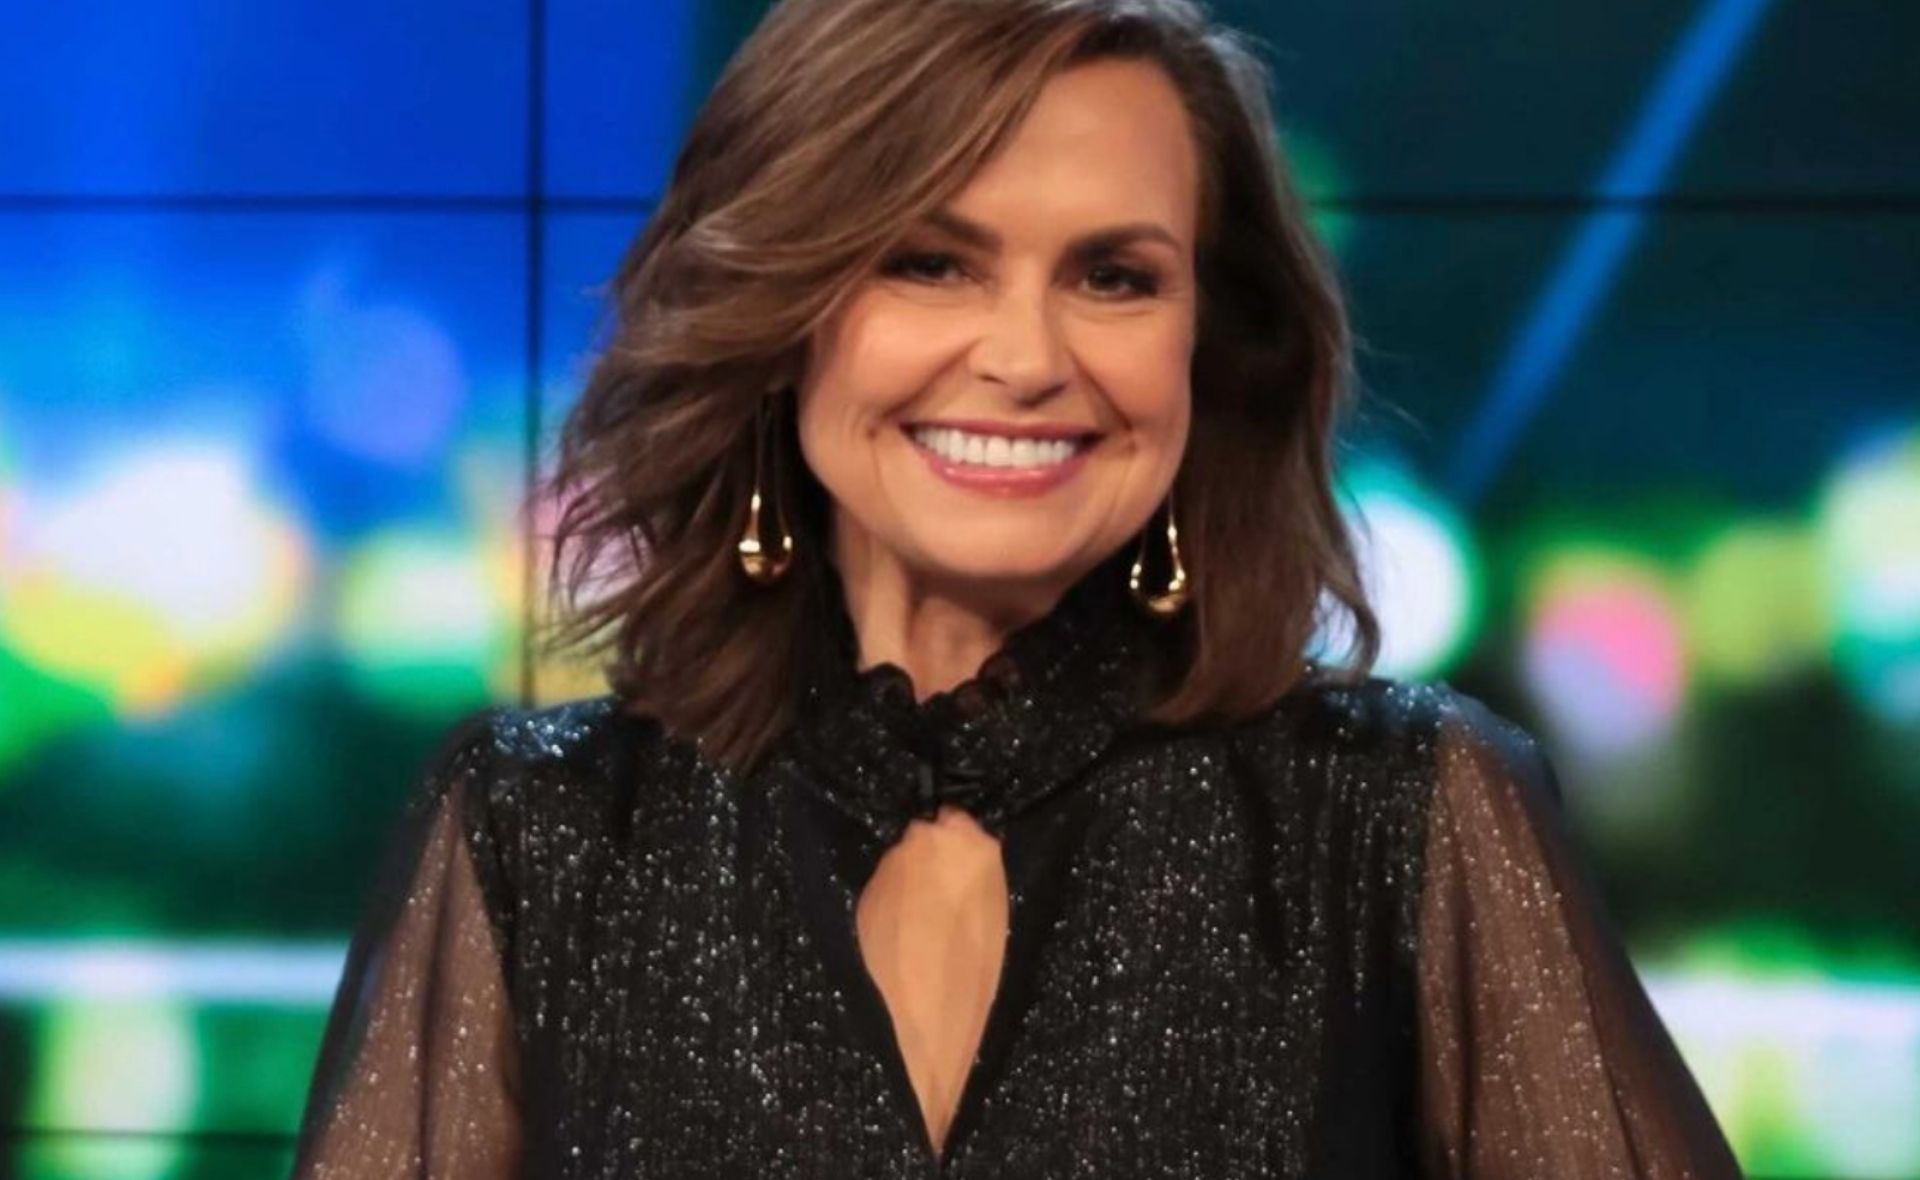 Lisa Wilkinson has announced she is releasing a soul-baring project that will detail gritty truths and unexpected revelations